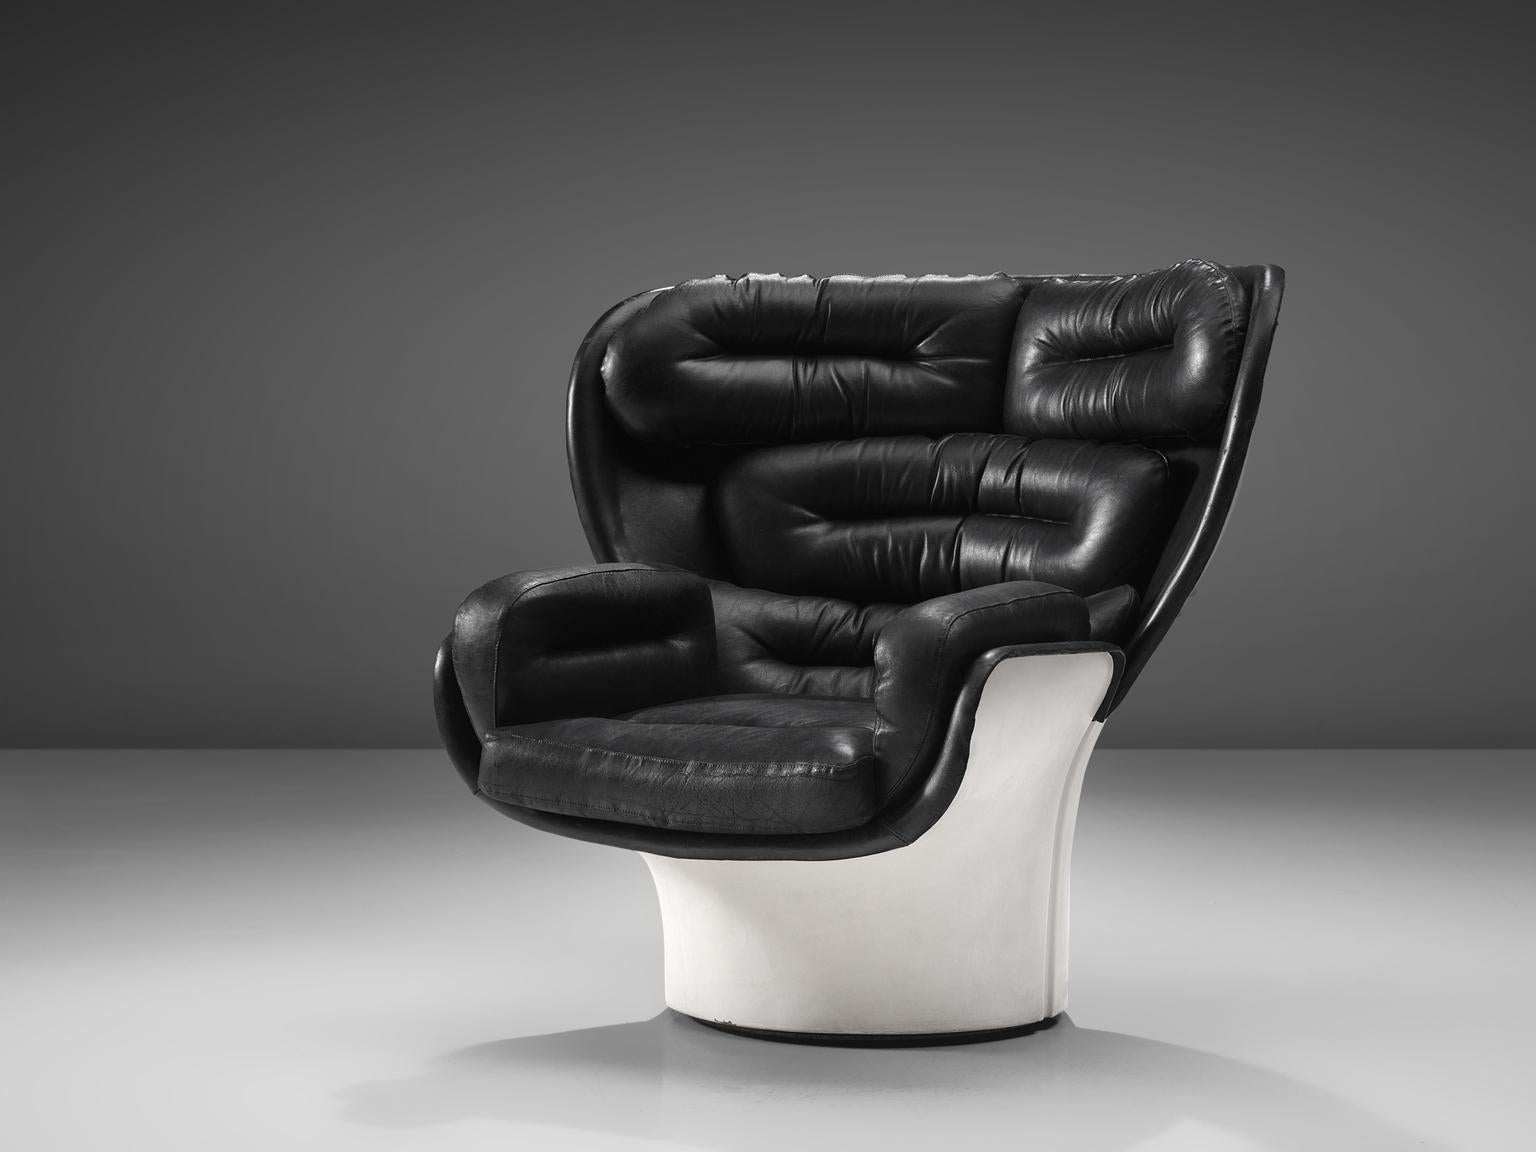 Joe Colombo for Comfort, lounge chair model Elda, fiberglass and leather, Italy, design 1963, later production. 

This 'Elda' armchair features its original black leather upholstery. The leather is in very good condition. This design is one of the